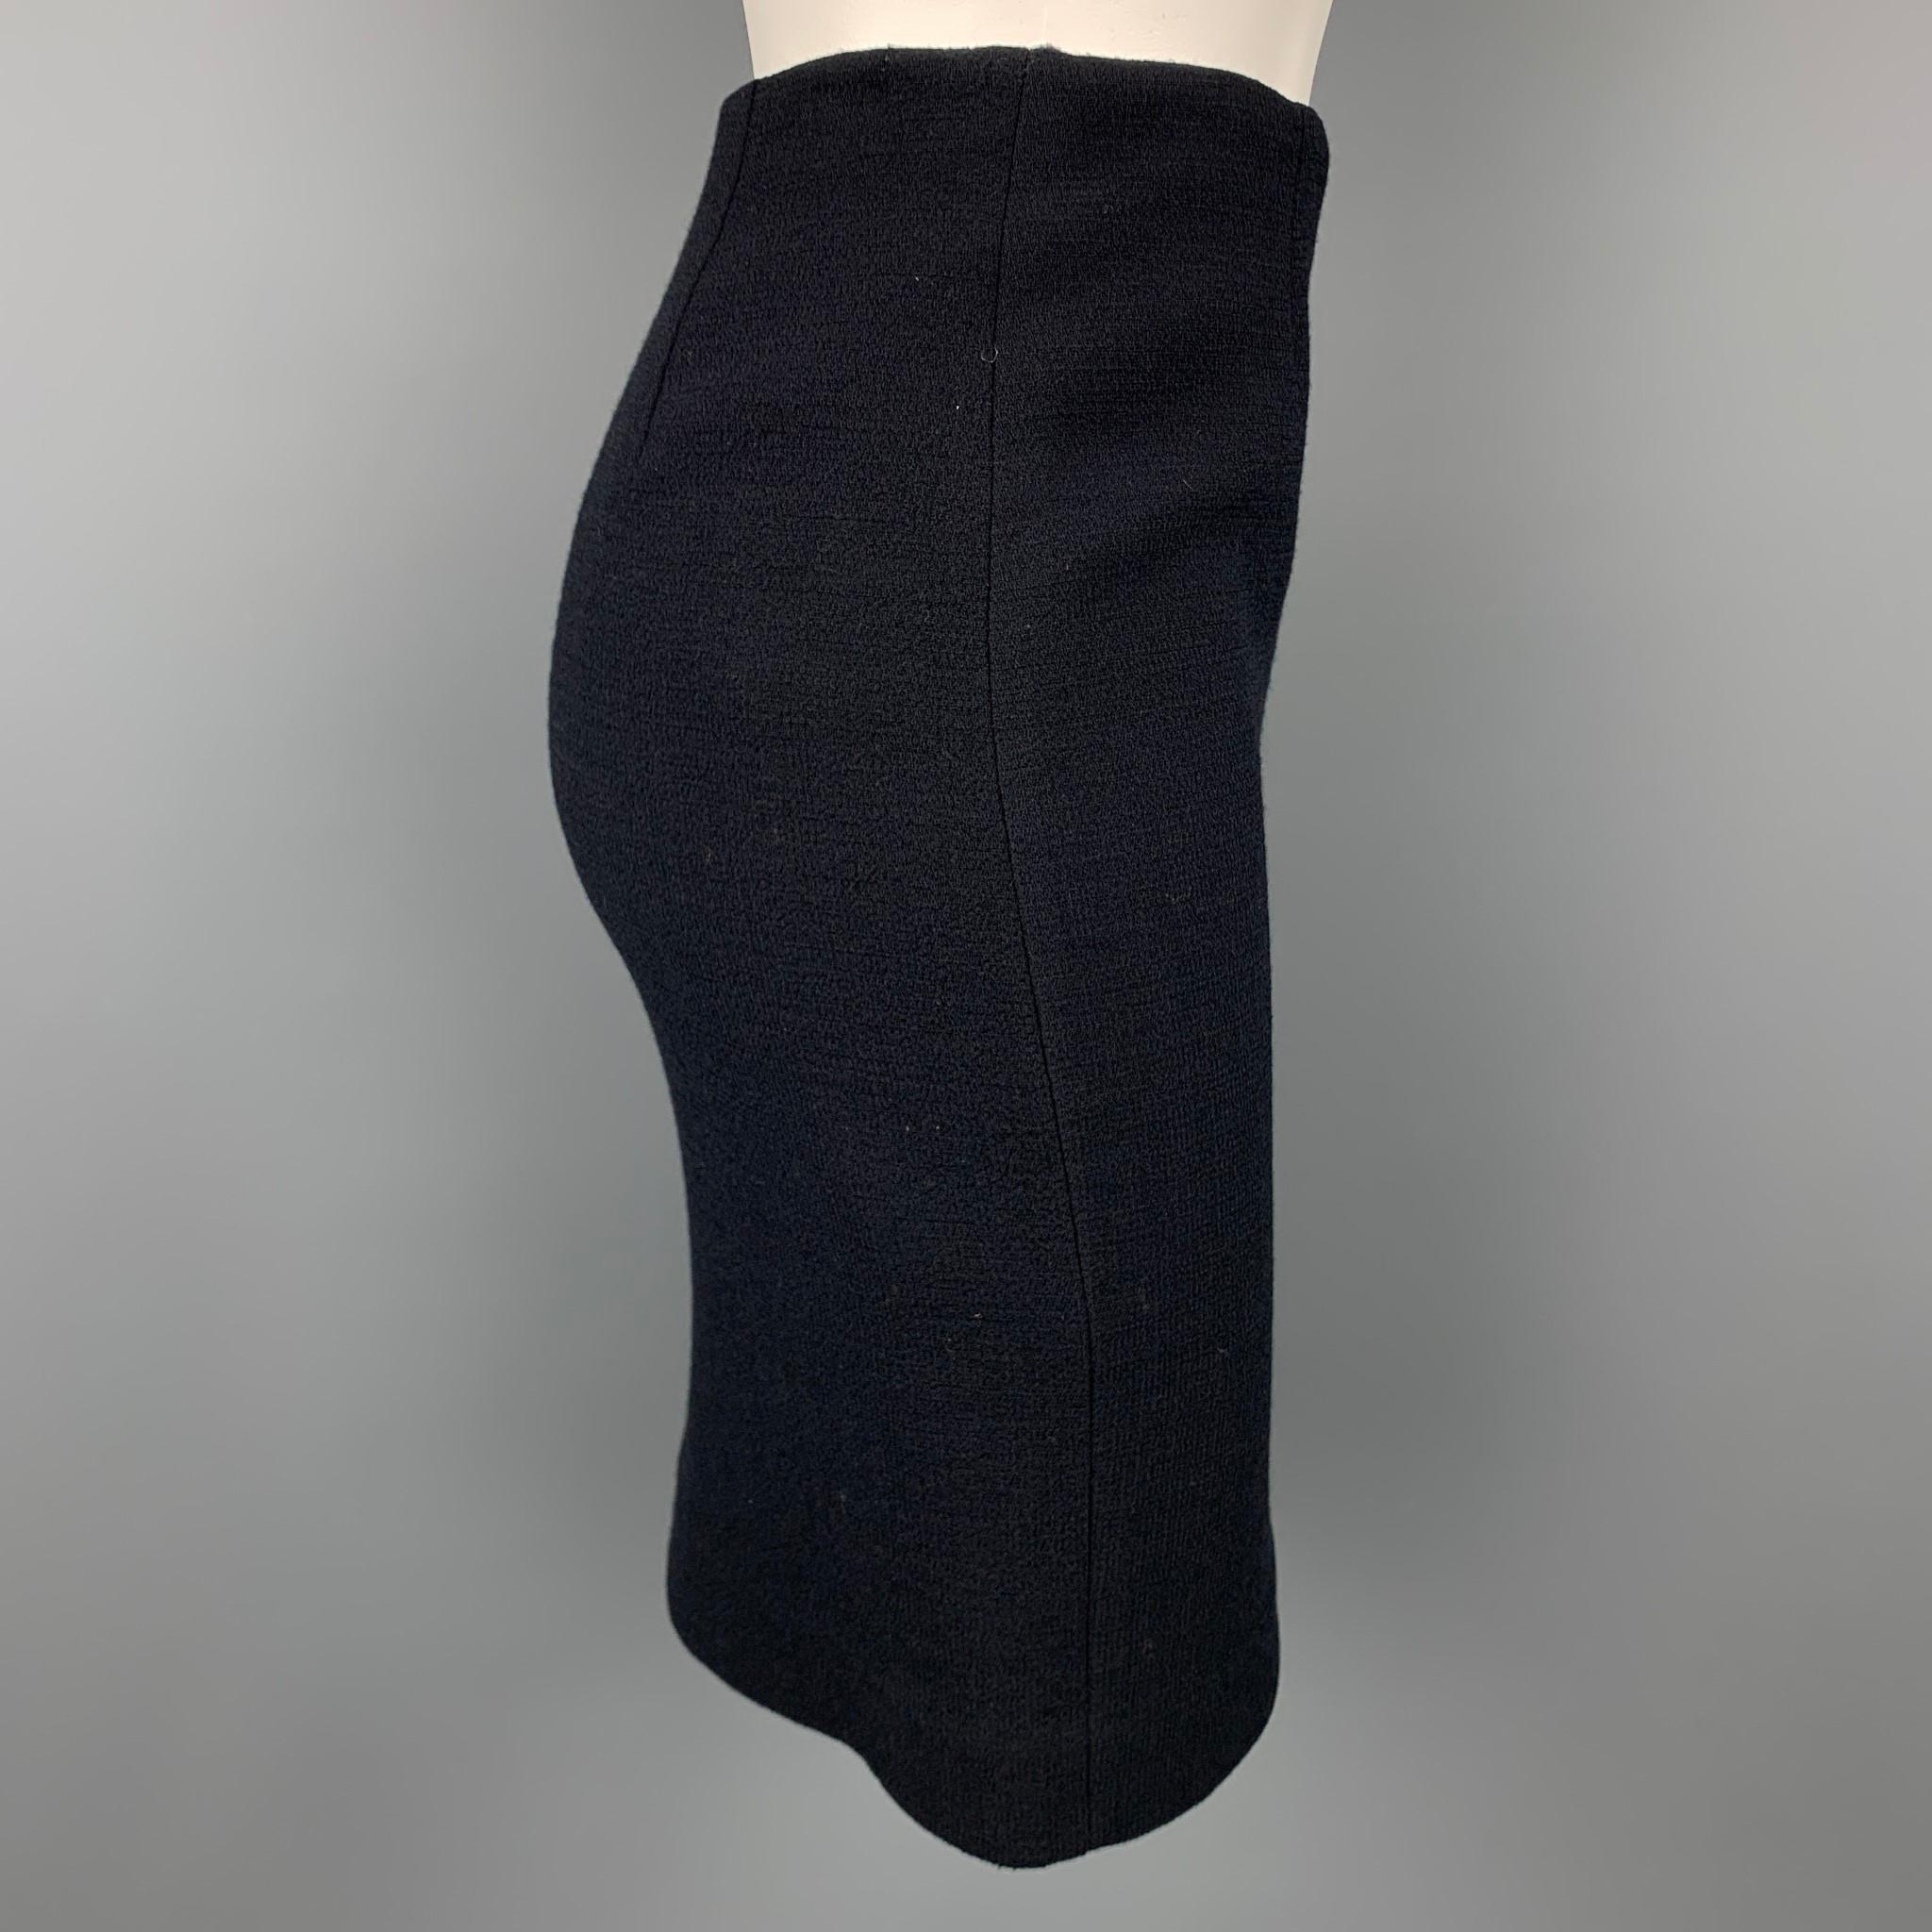 EMPORIO ARMANI skirt comes in a black crepe with a slip liner featuring a pencil style and a side zipper closure. Made in Italy.

Very Good Pre-Owned Condition.
Marked: No size marked

Measurements:

Waist: 26 in.
Hip: 32 in.
Length: 19 in. 